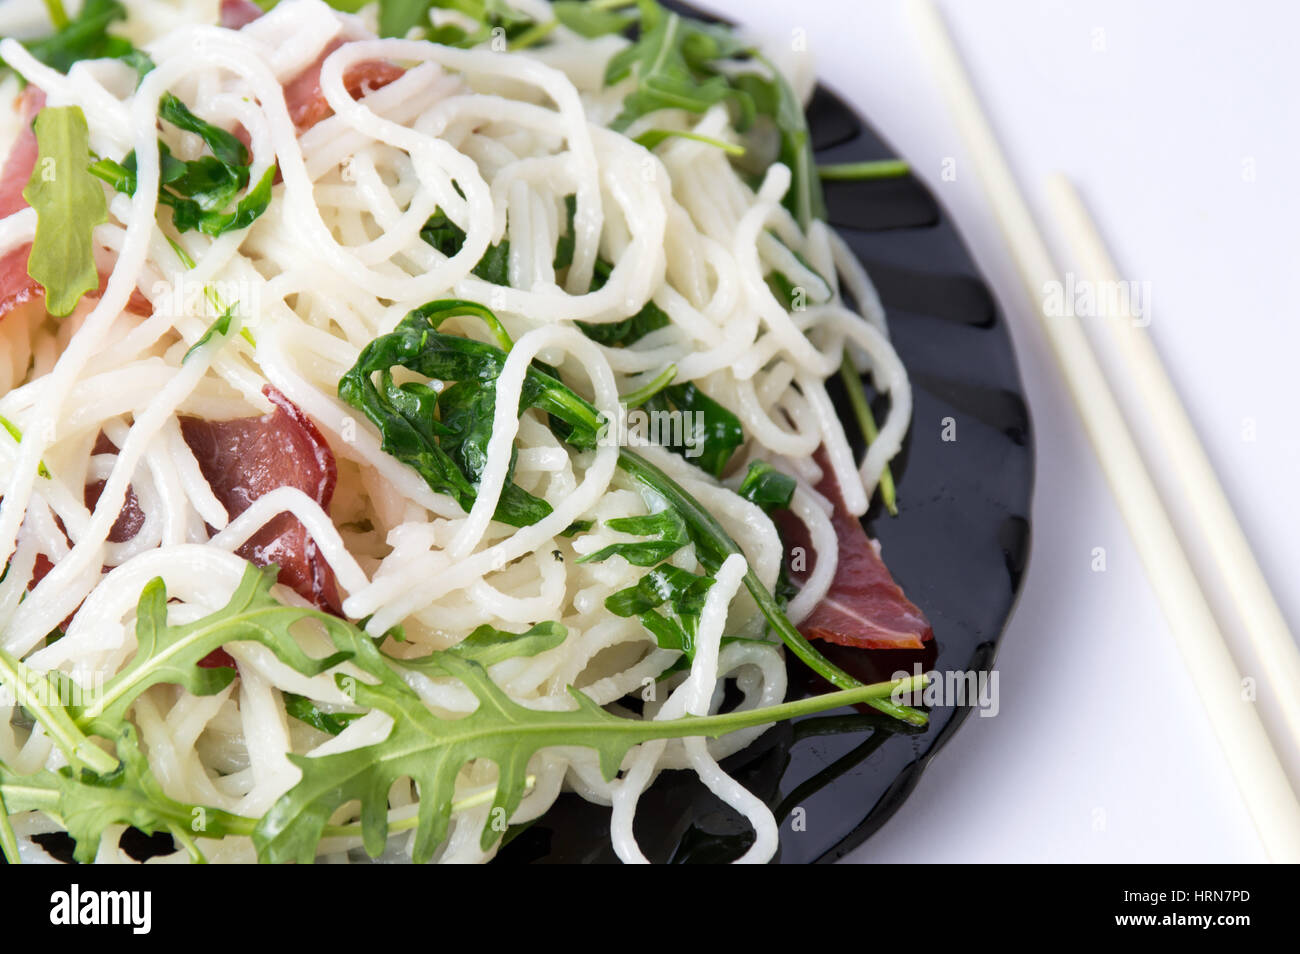 Pasta with prosciutto and arugula vegetable close up Stock Photo